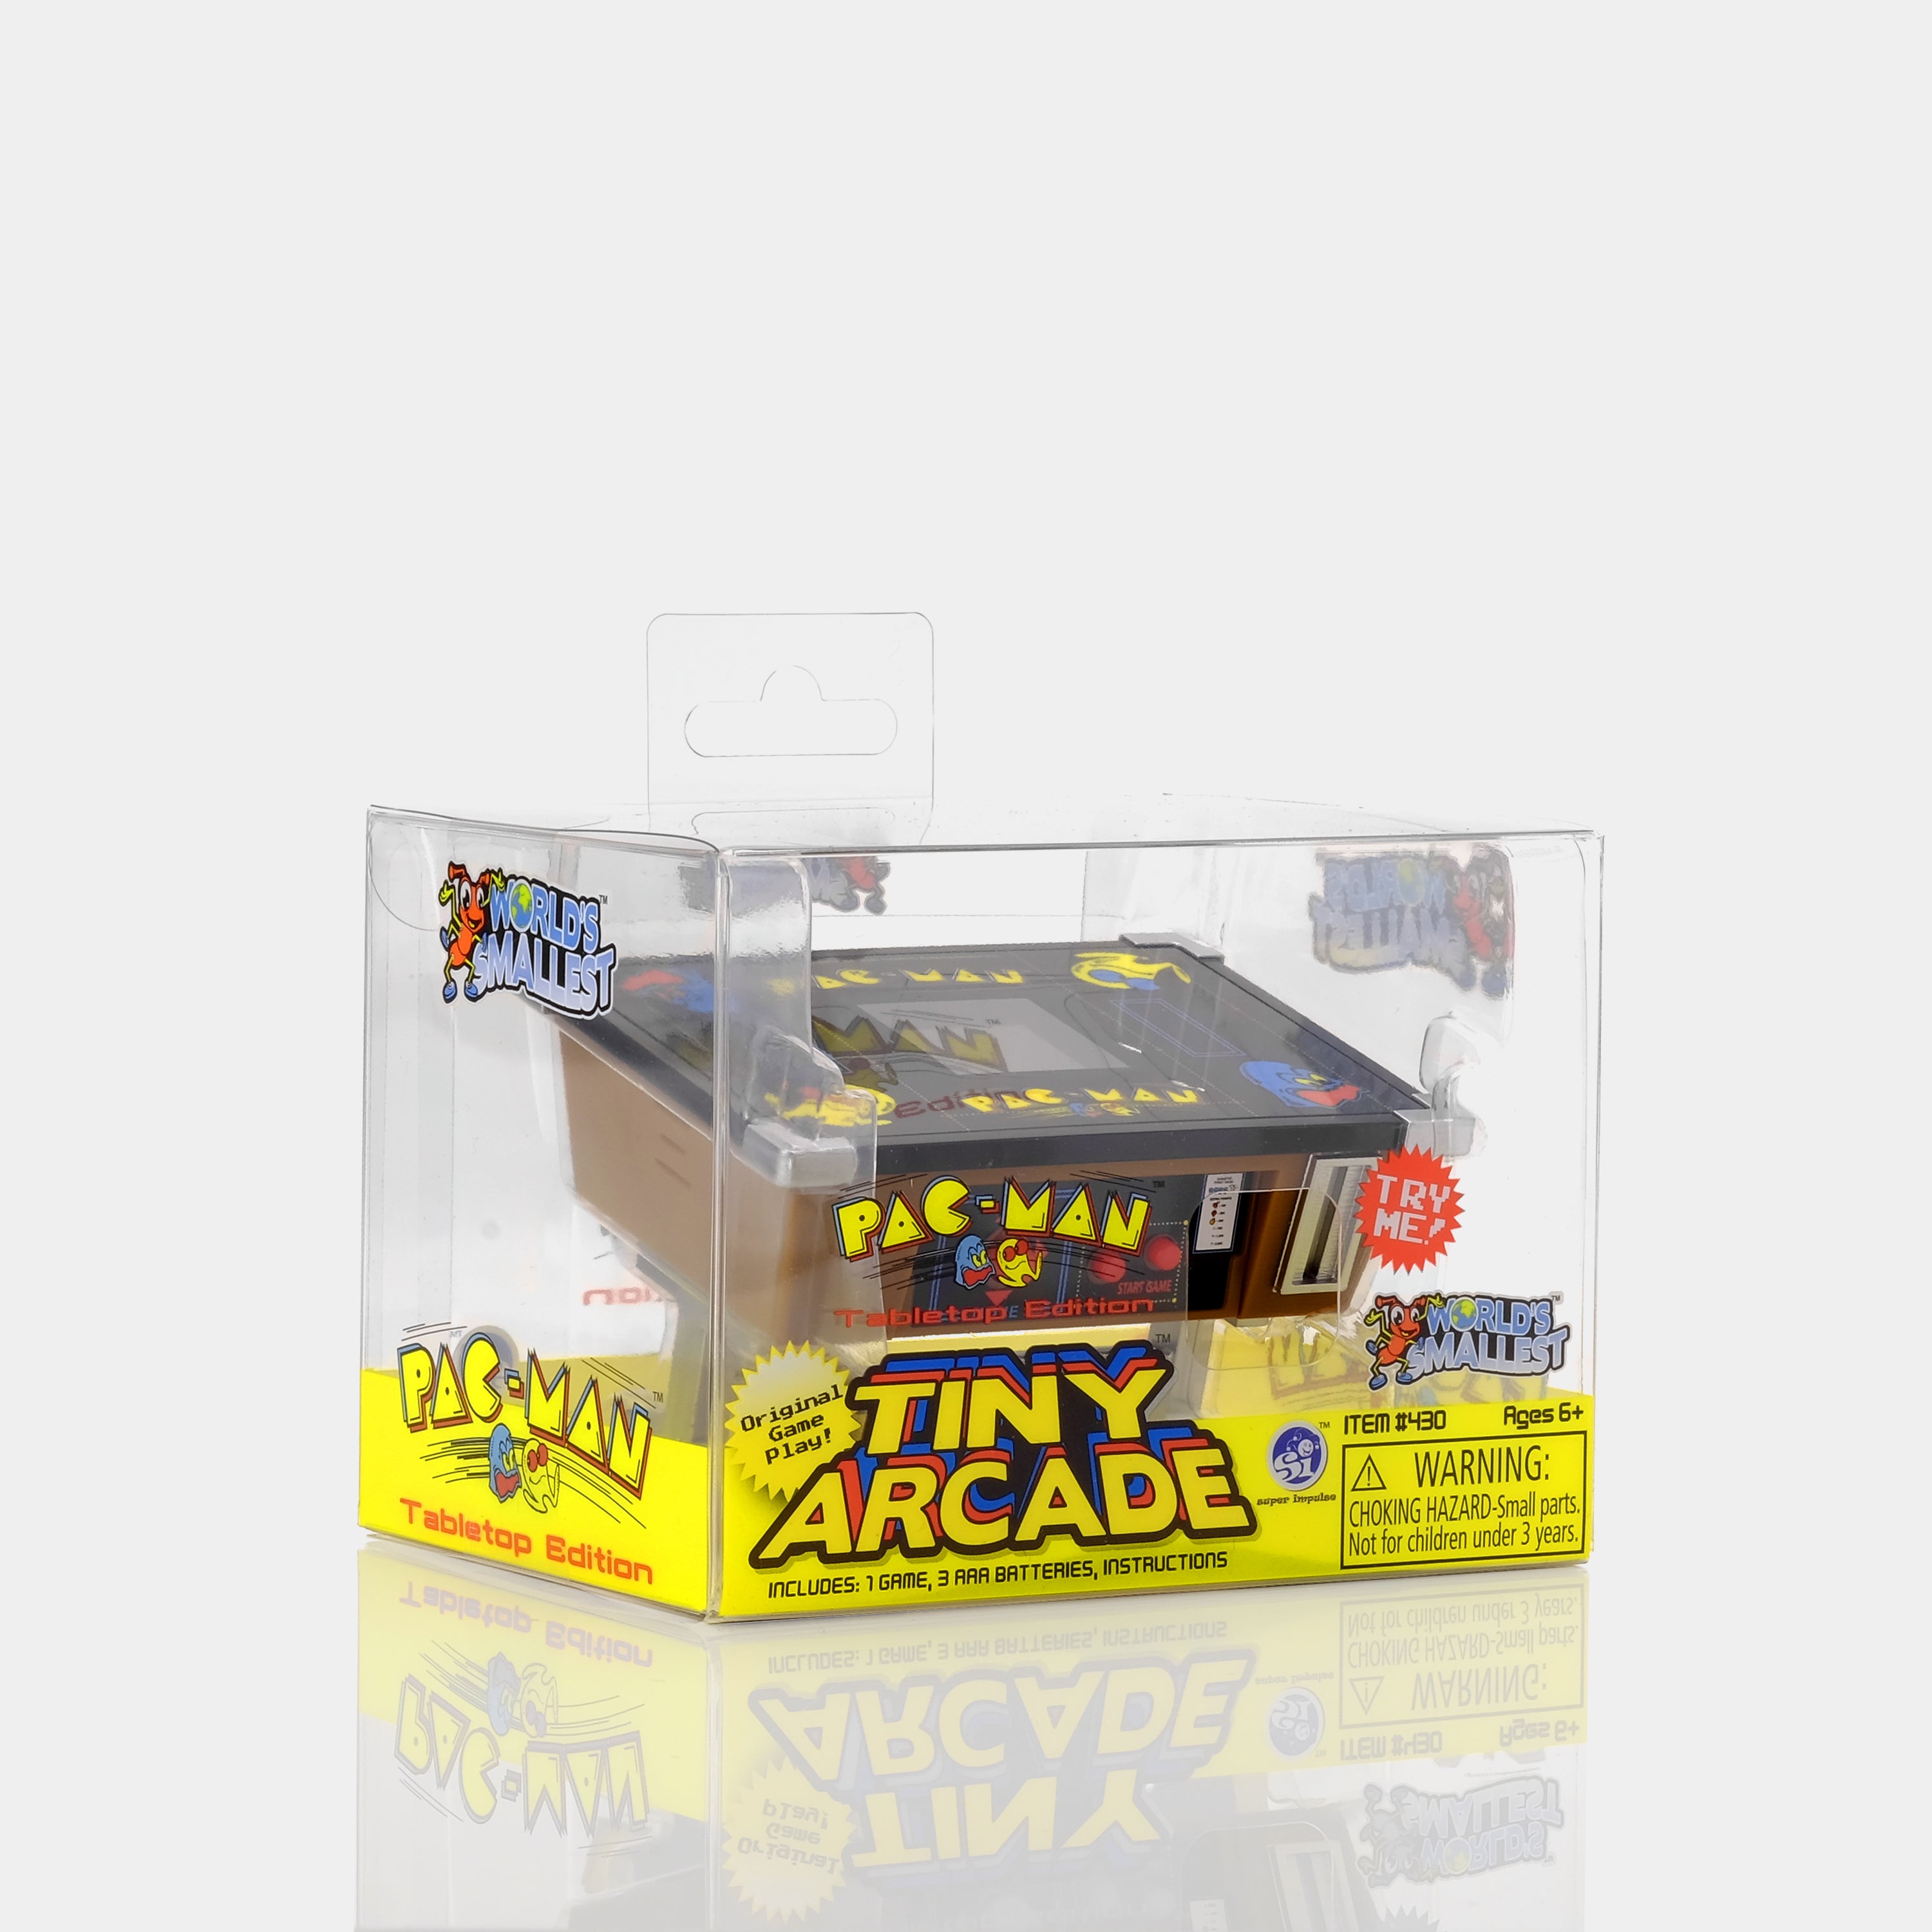 Tiny Arcade Pac-Man Tabletop Edition Game